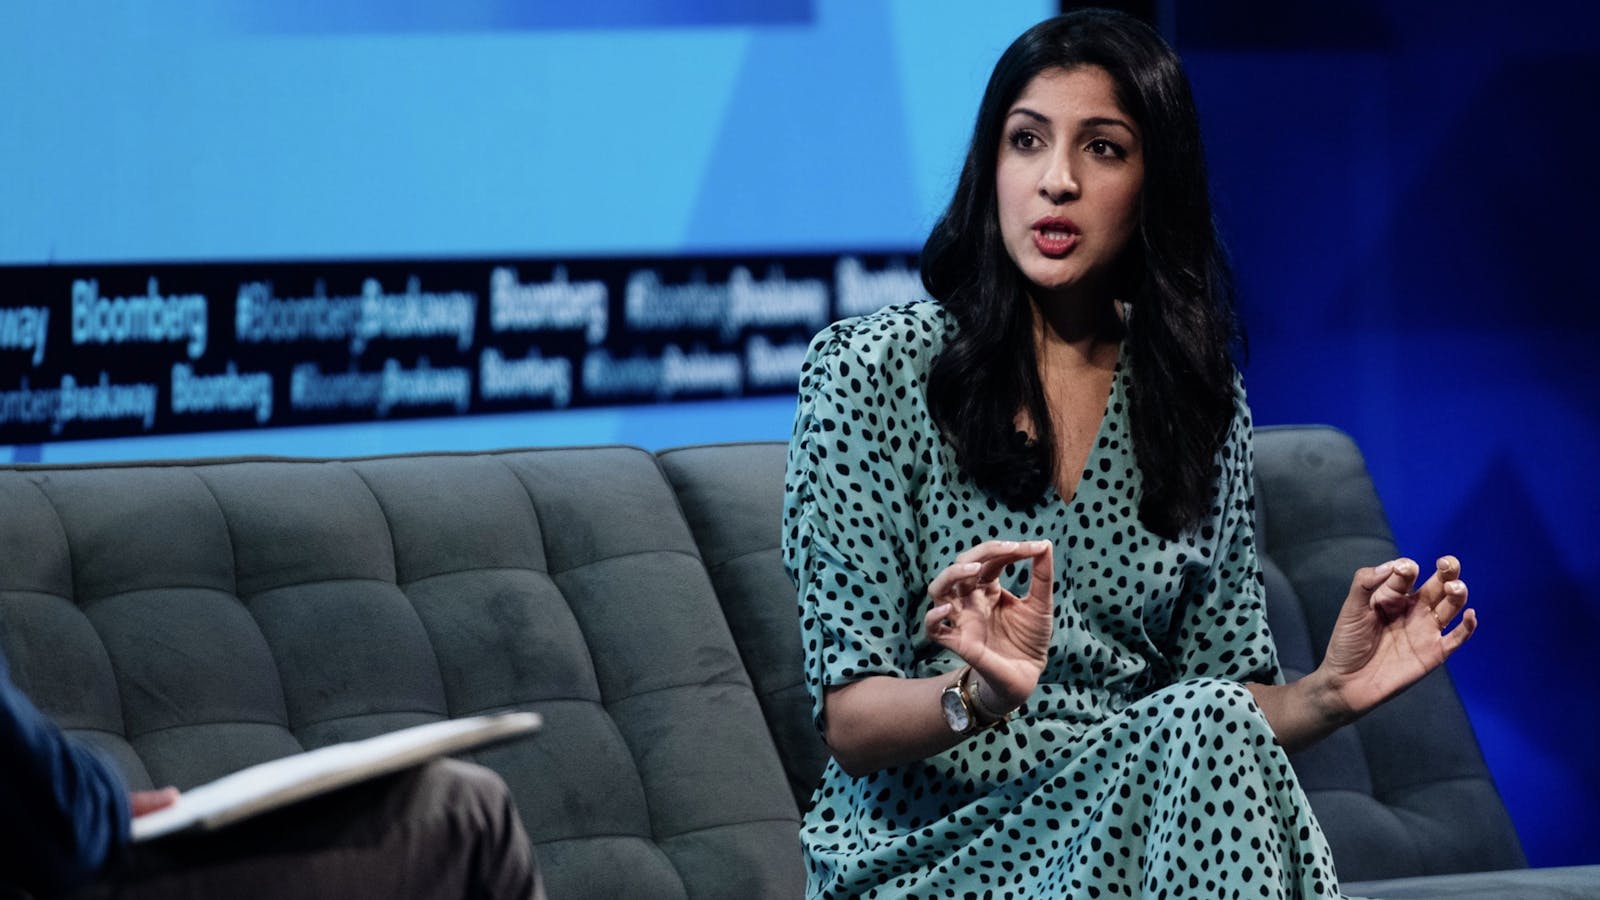 Vimeo CEO Anjali Sud. Photo by Bloomberg